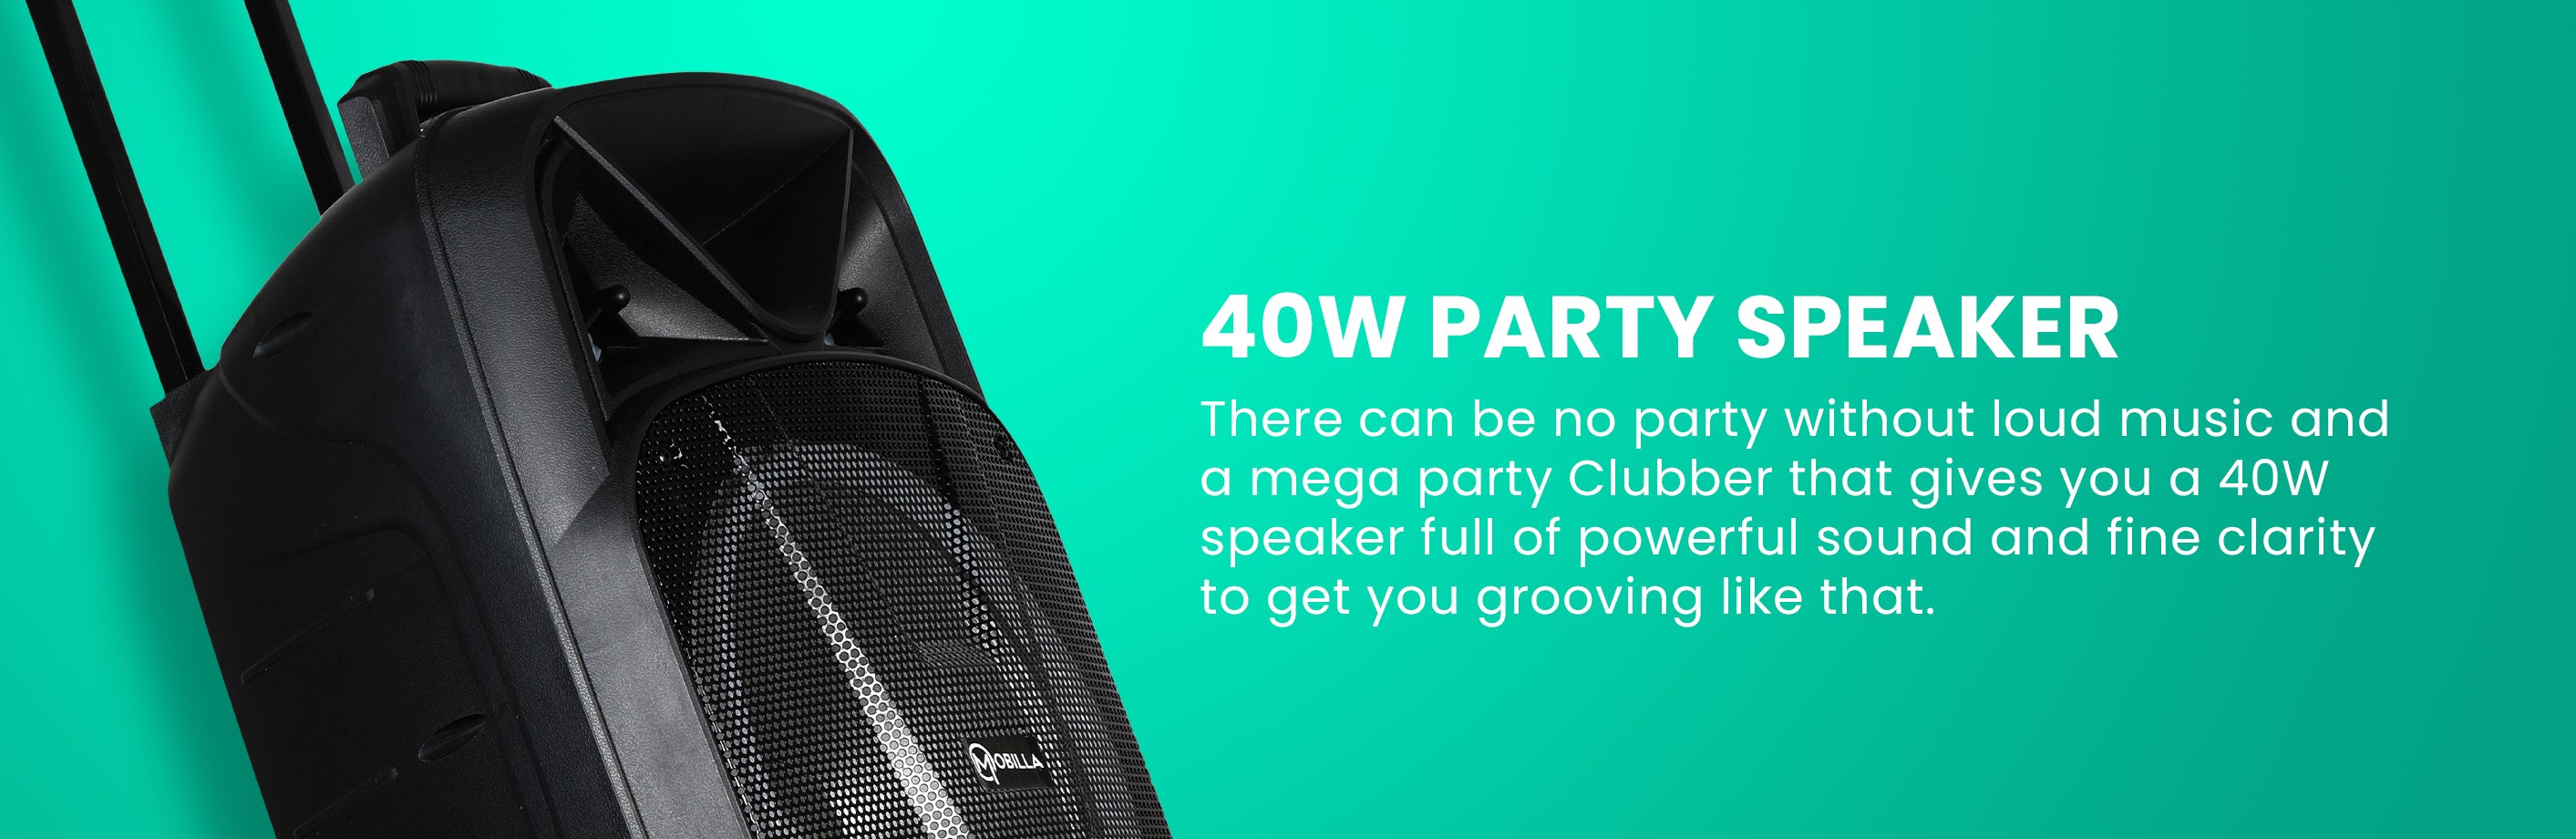 Portable party speakers with dazzling lights